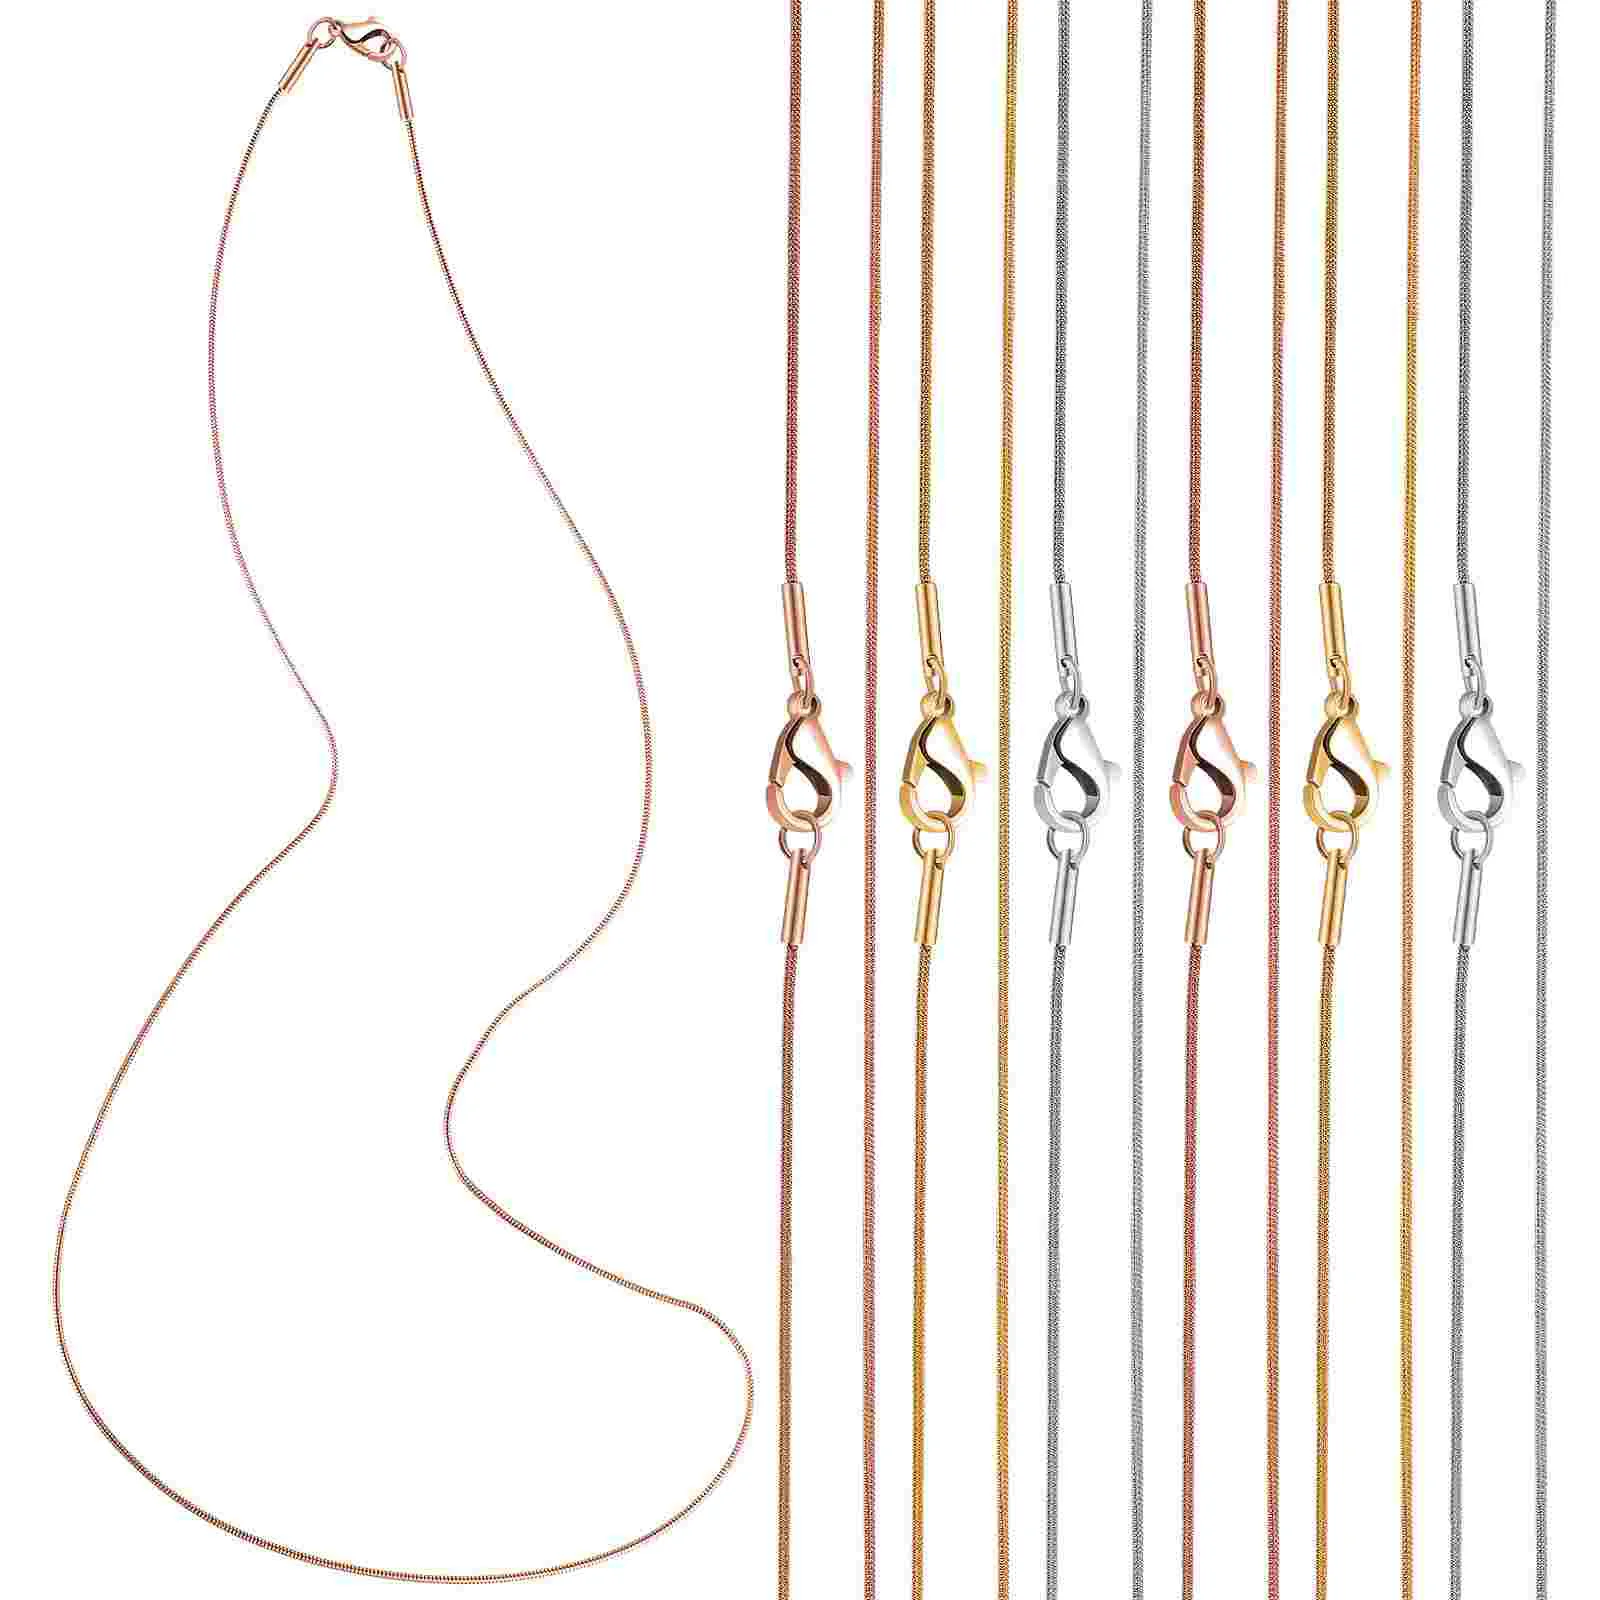 

12 Pcs Round Snake Necklace Chain for Jewelry Making Necklaces Accessories Stainless Steel Metal Chains The DIY